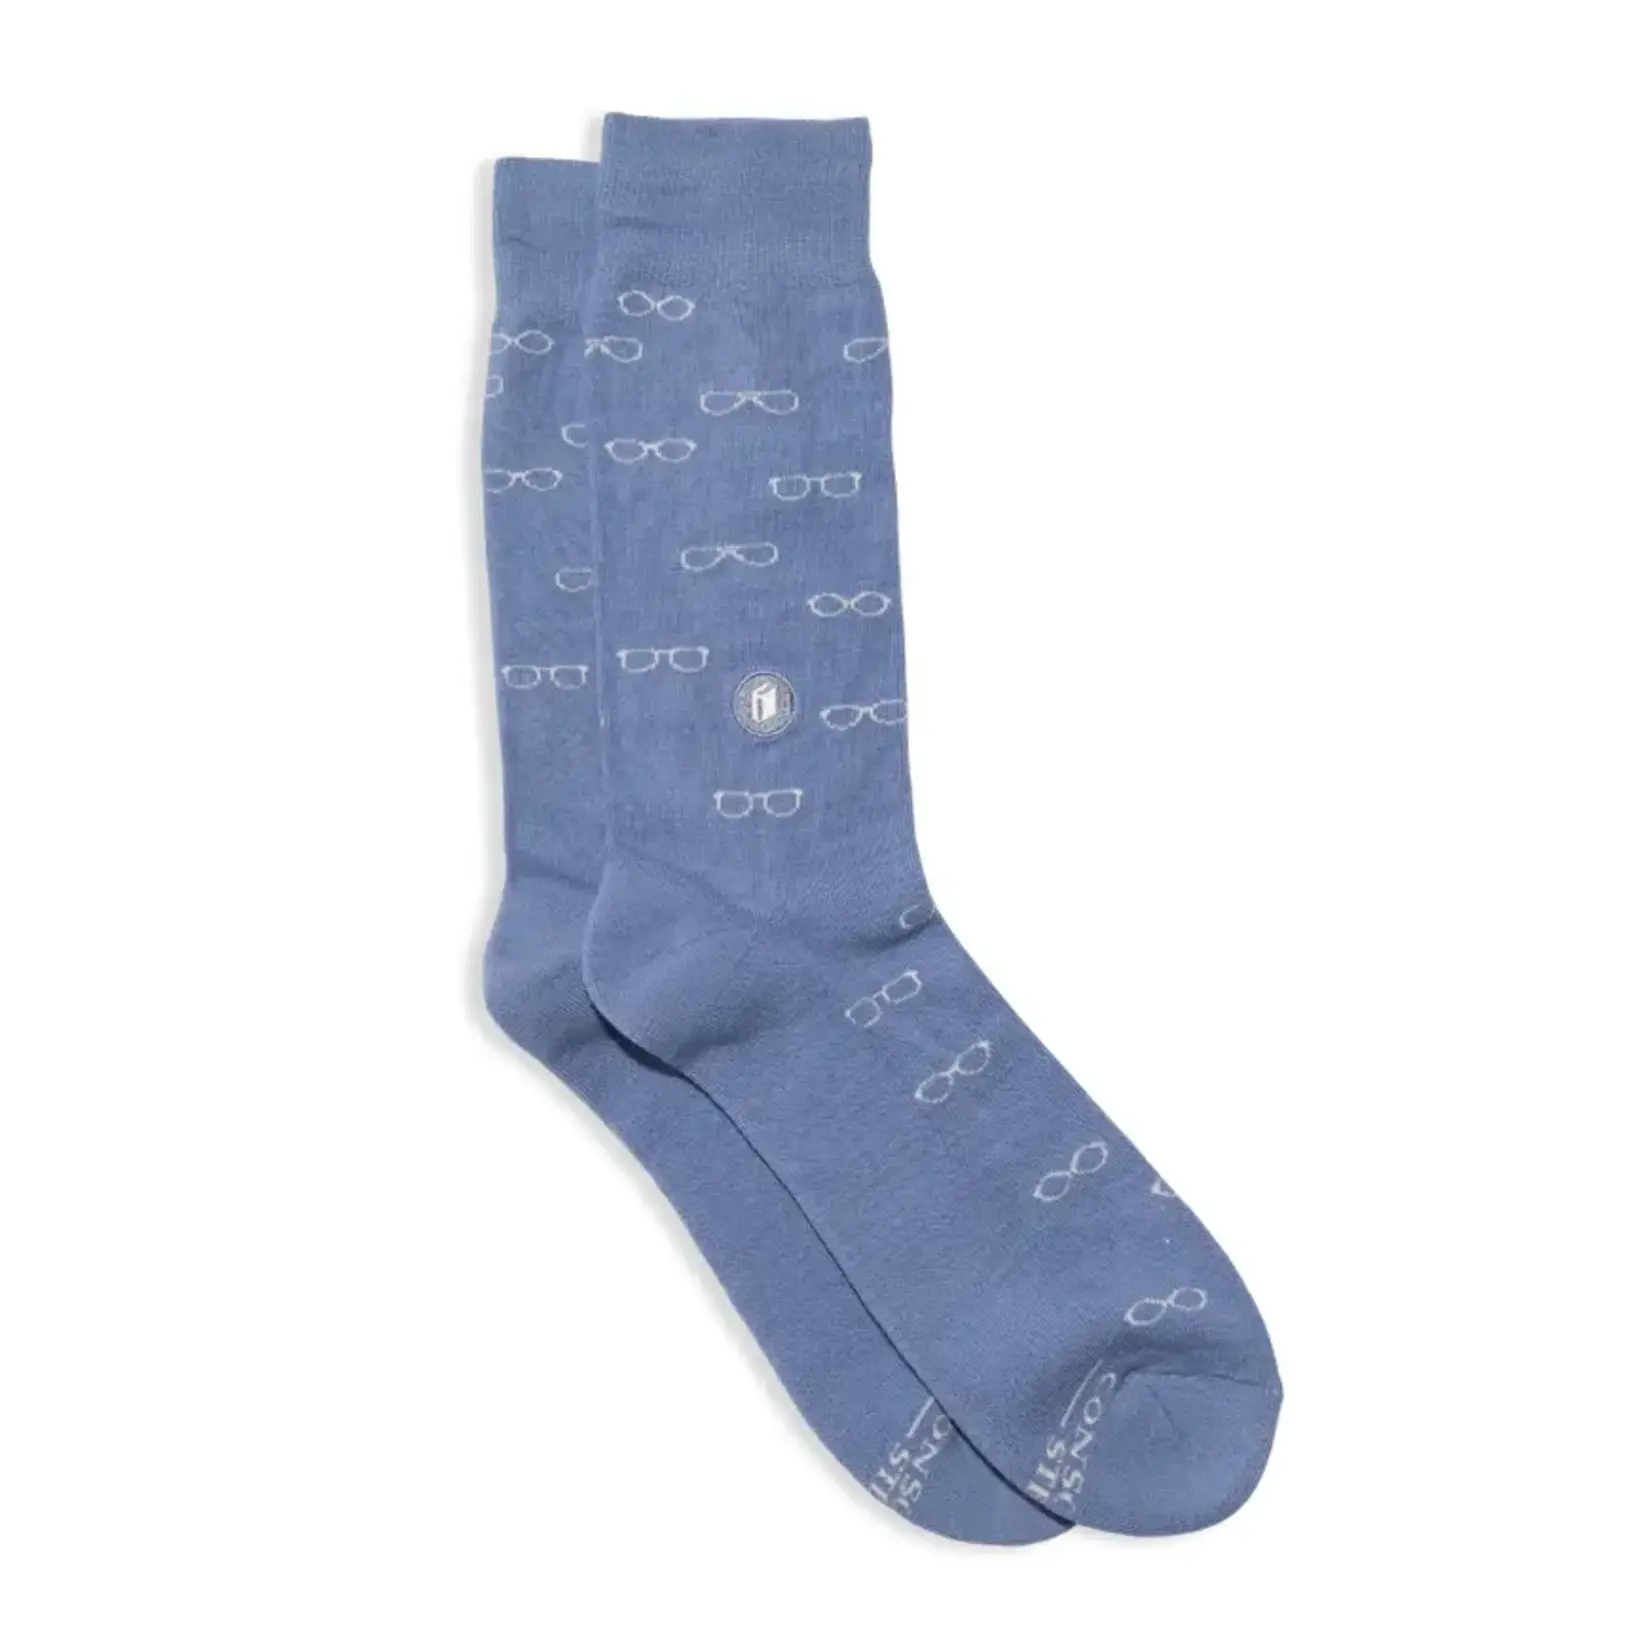 Socks that Give Books (Blue Glasses) - Small